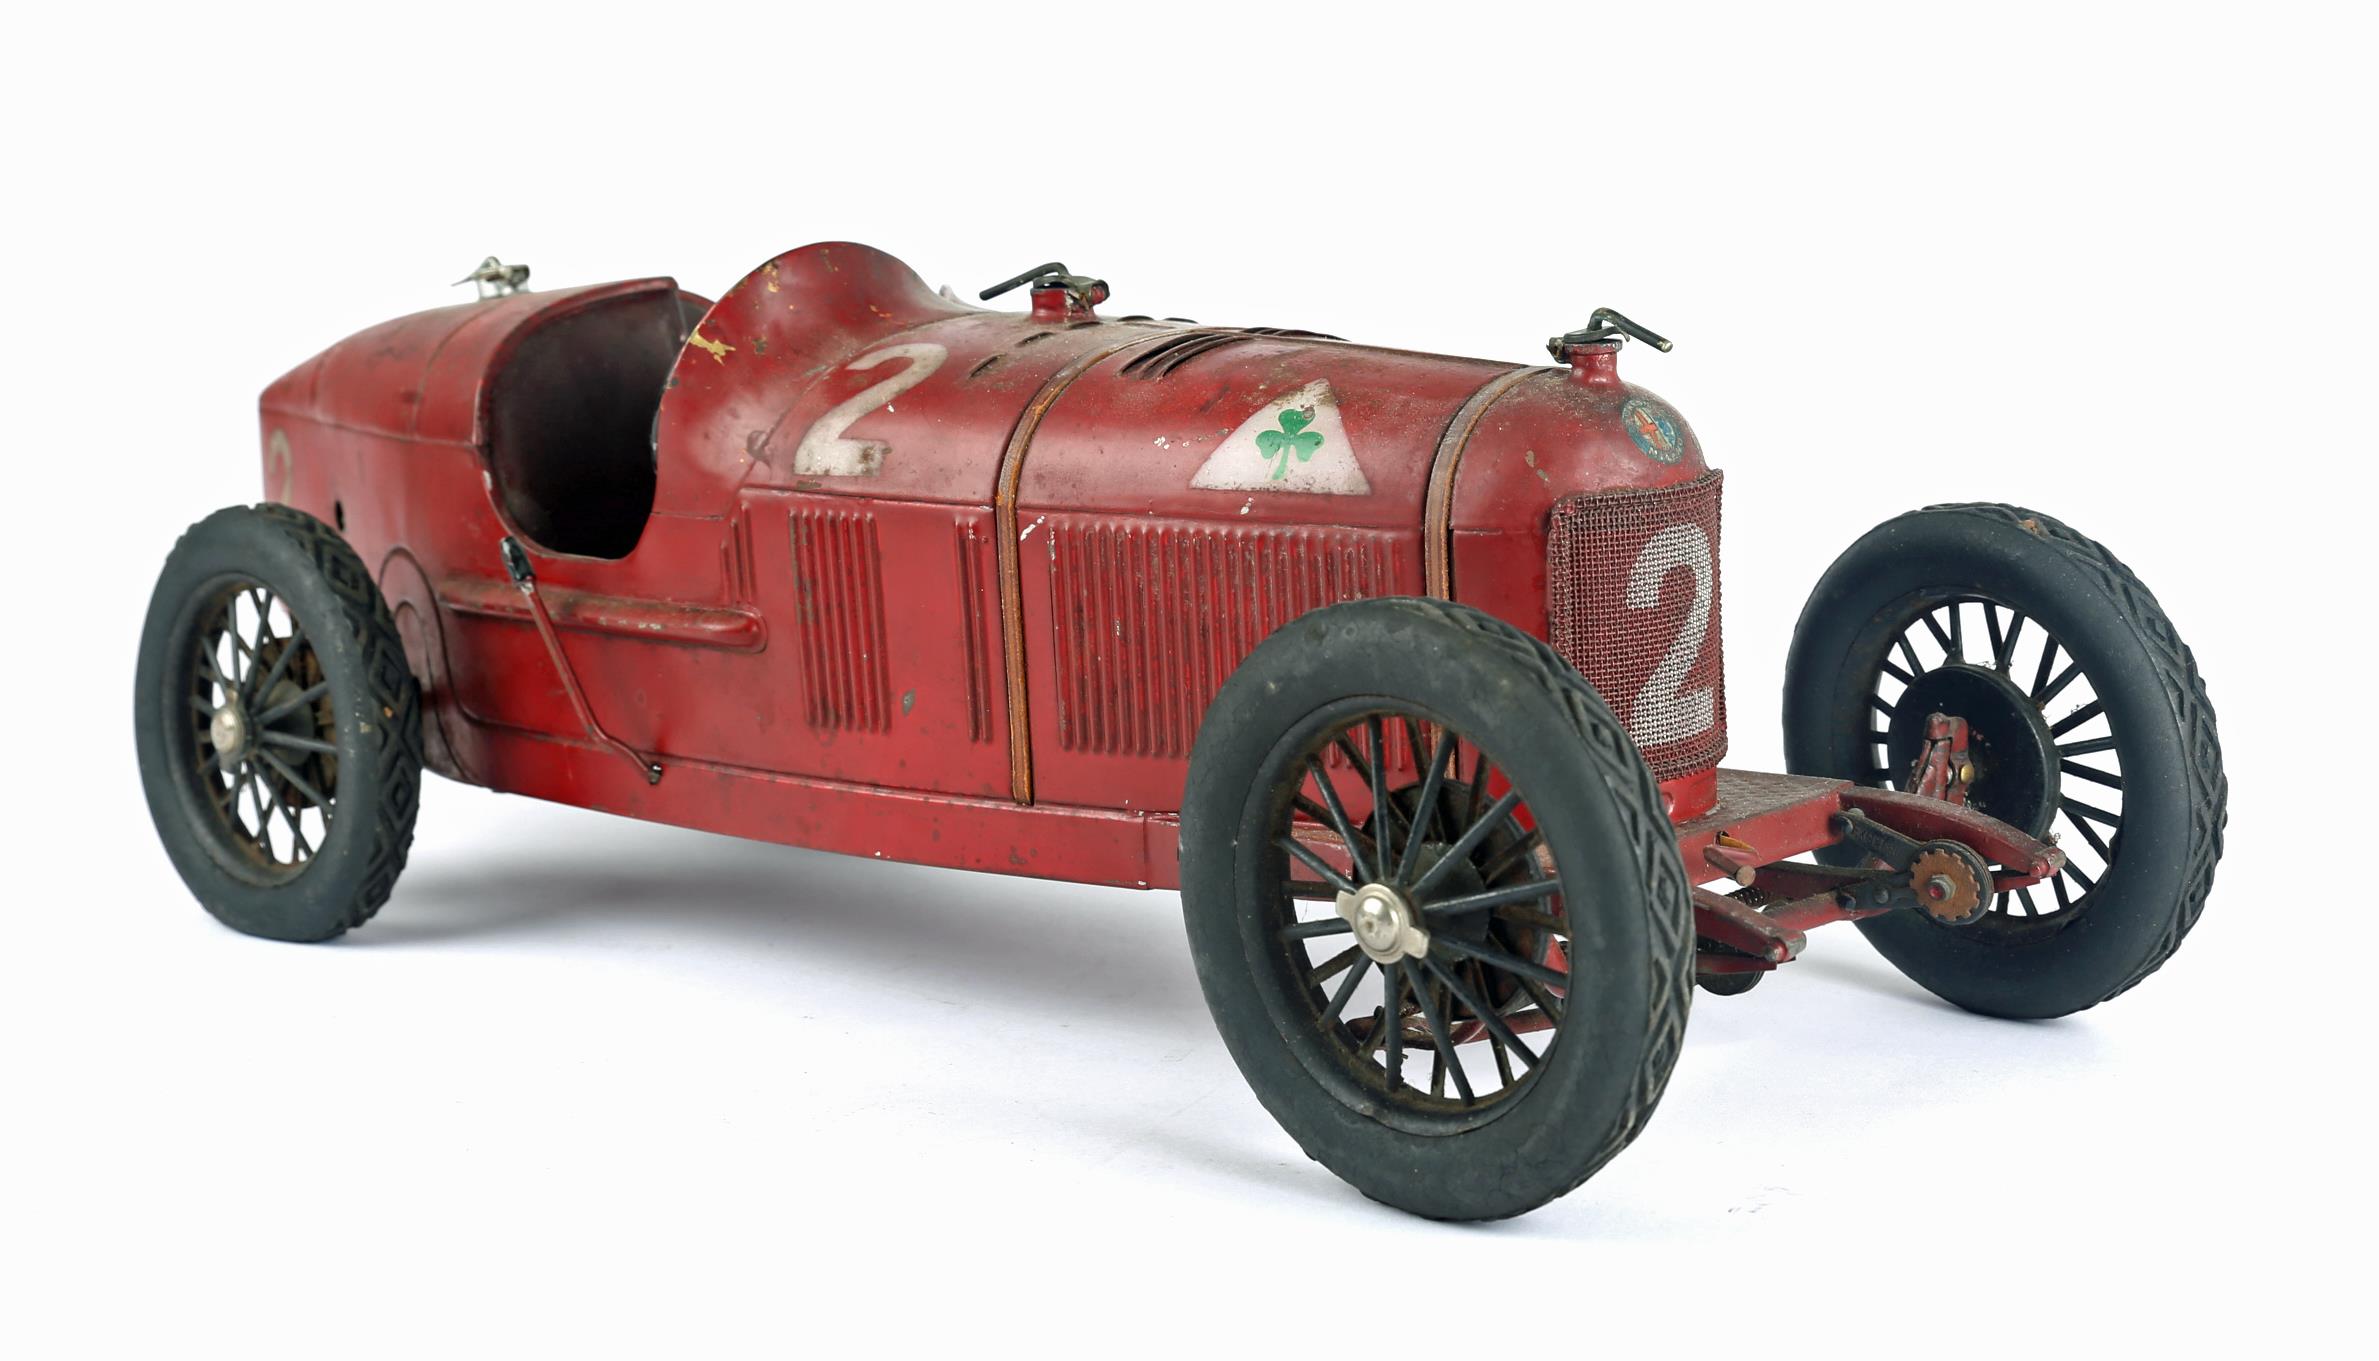 CIJ (Compagnie Industrielle du Jouet) large Alfa Romeo P2 racing car, early model with brake